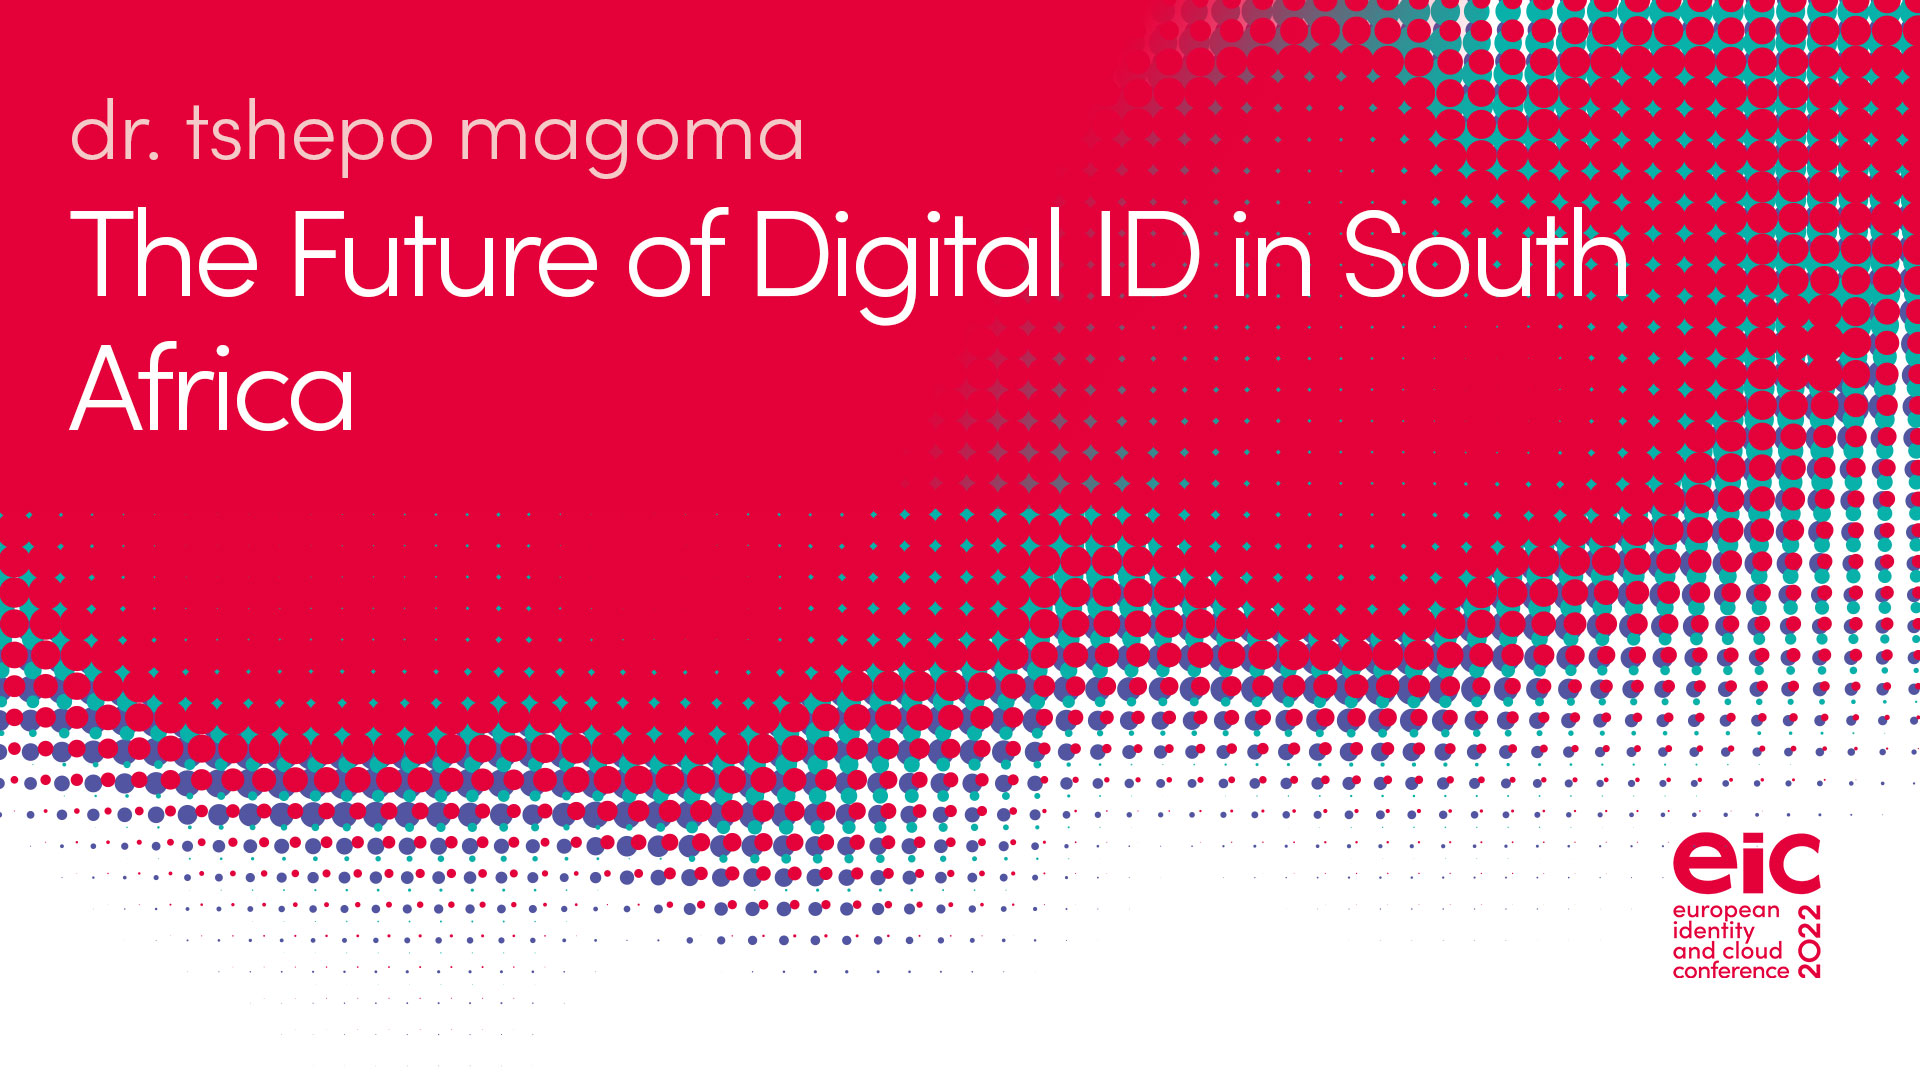 The Future of Digital ID in South Africa